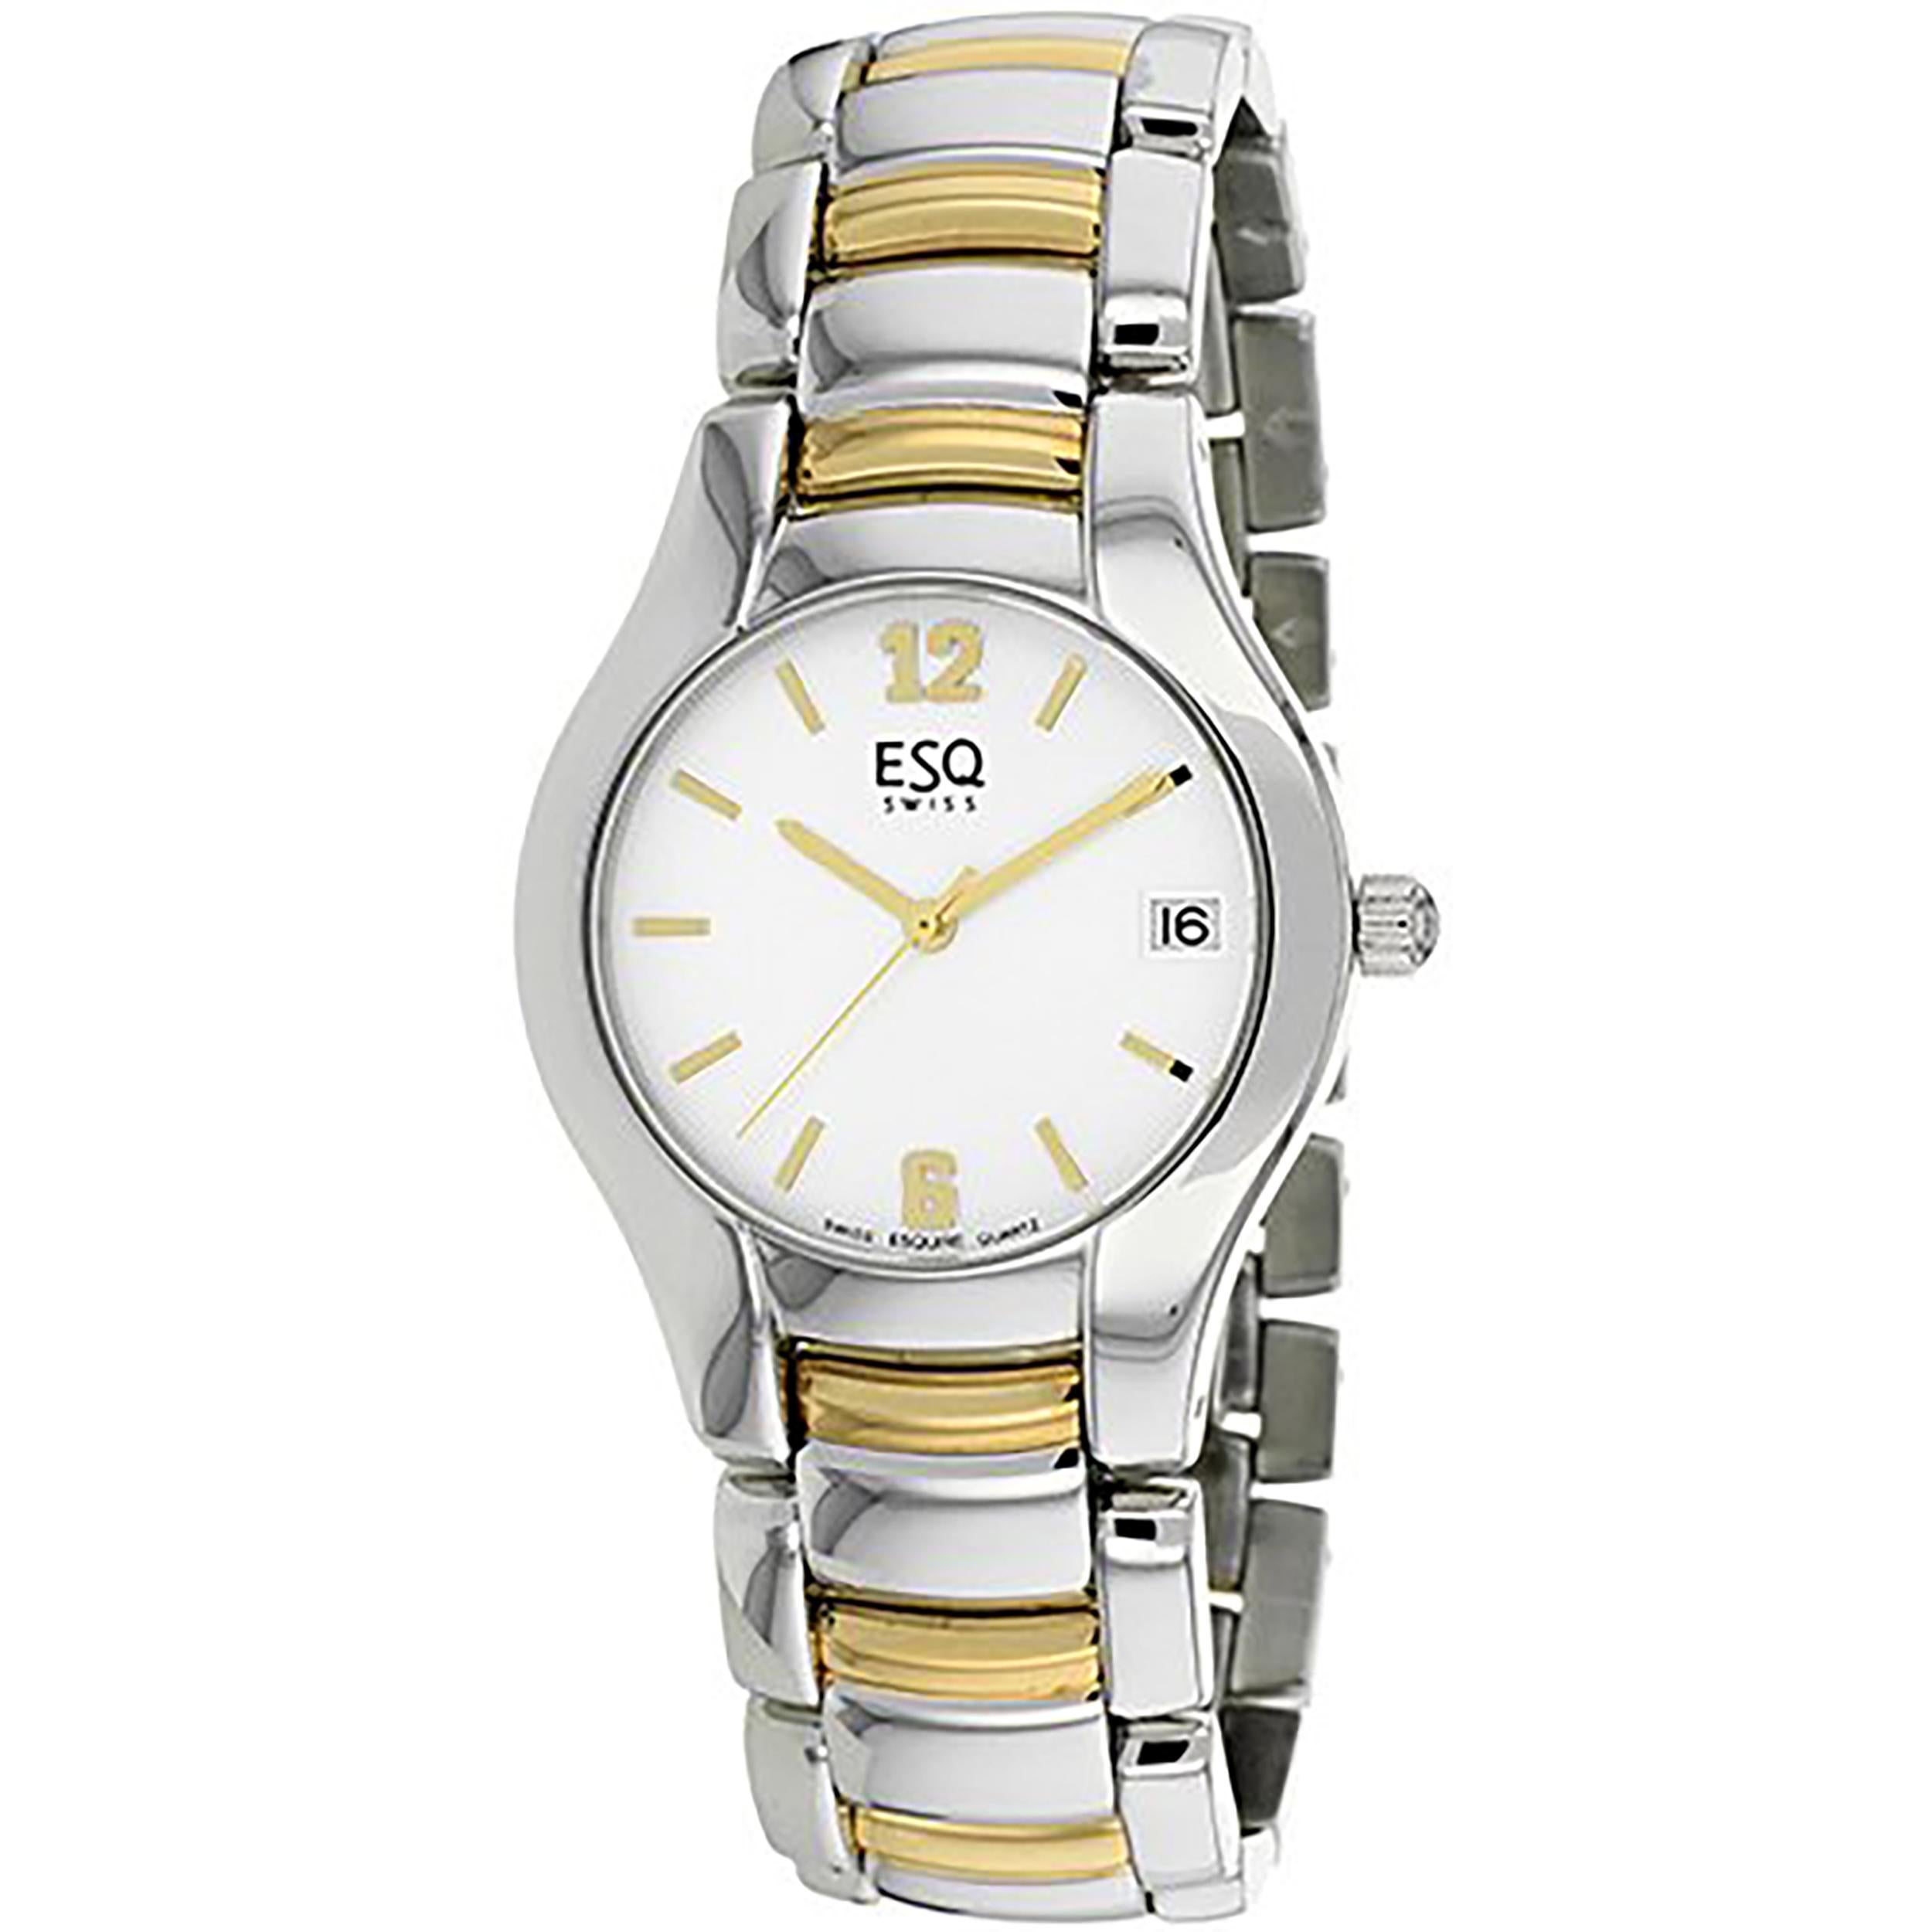 Pre-owned ESQ by Movado Previa Stainless Steel Swiss Made Quartz Mens Watch 7300671. Minor Scratches and Discoloration From Handling. this Beautiful Timepiece Features a Stainless Steel Case with a Two-Tone Stainless Steel Bracelet, Fixed Stainless